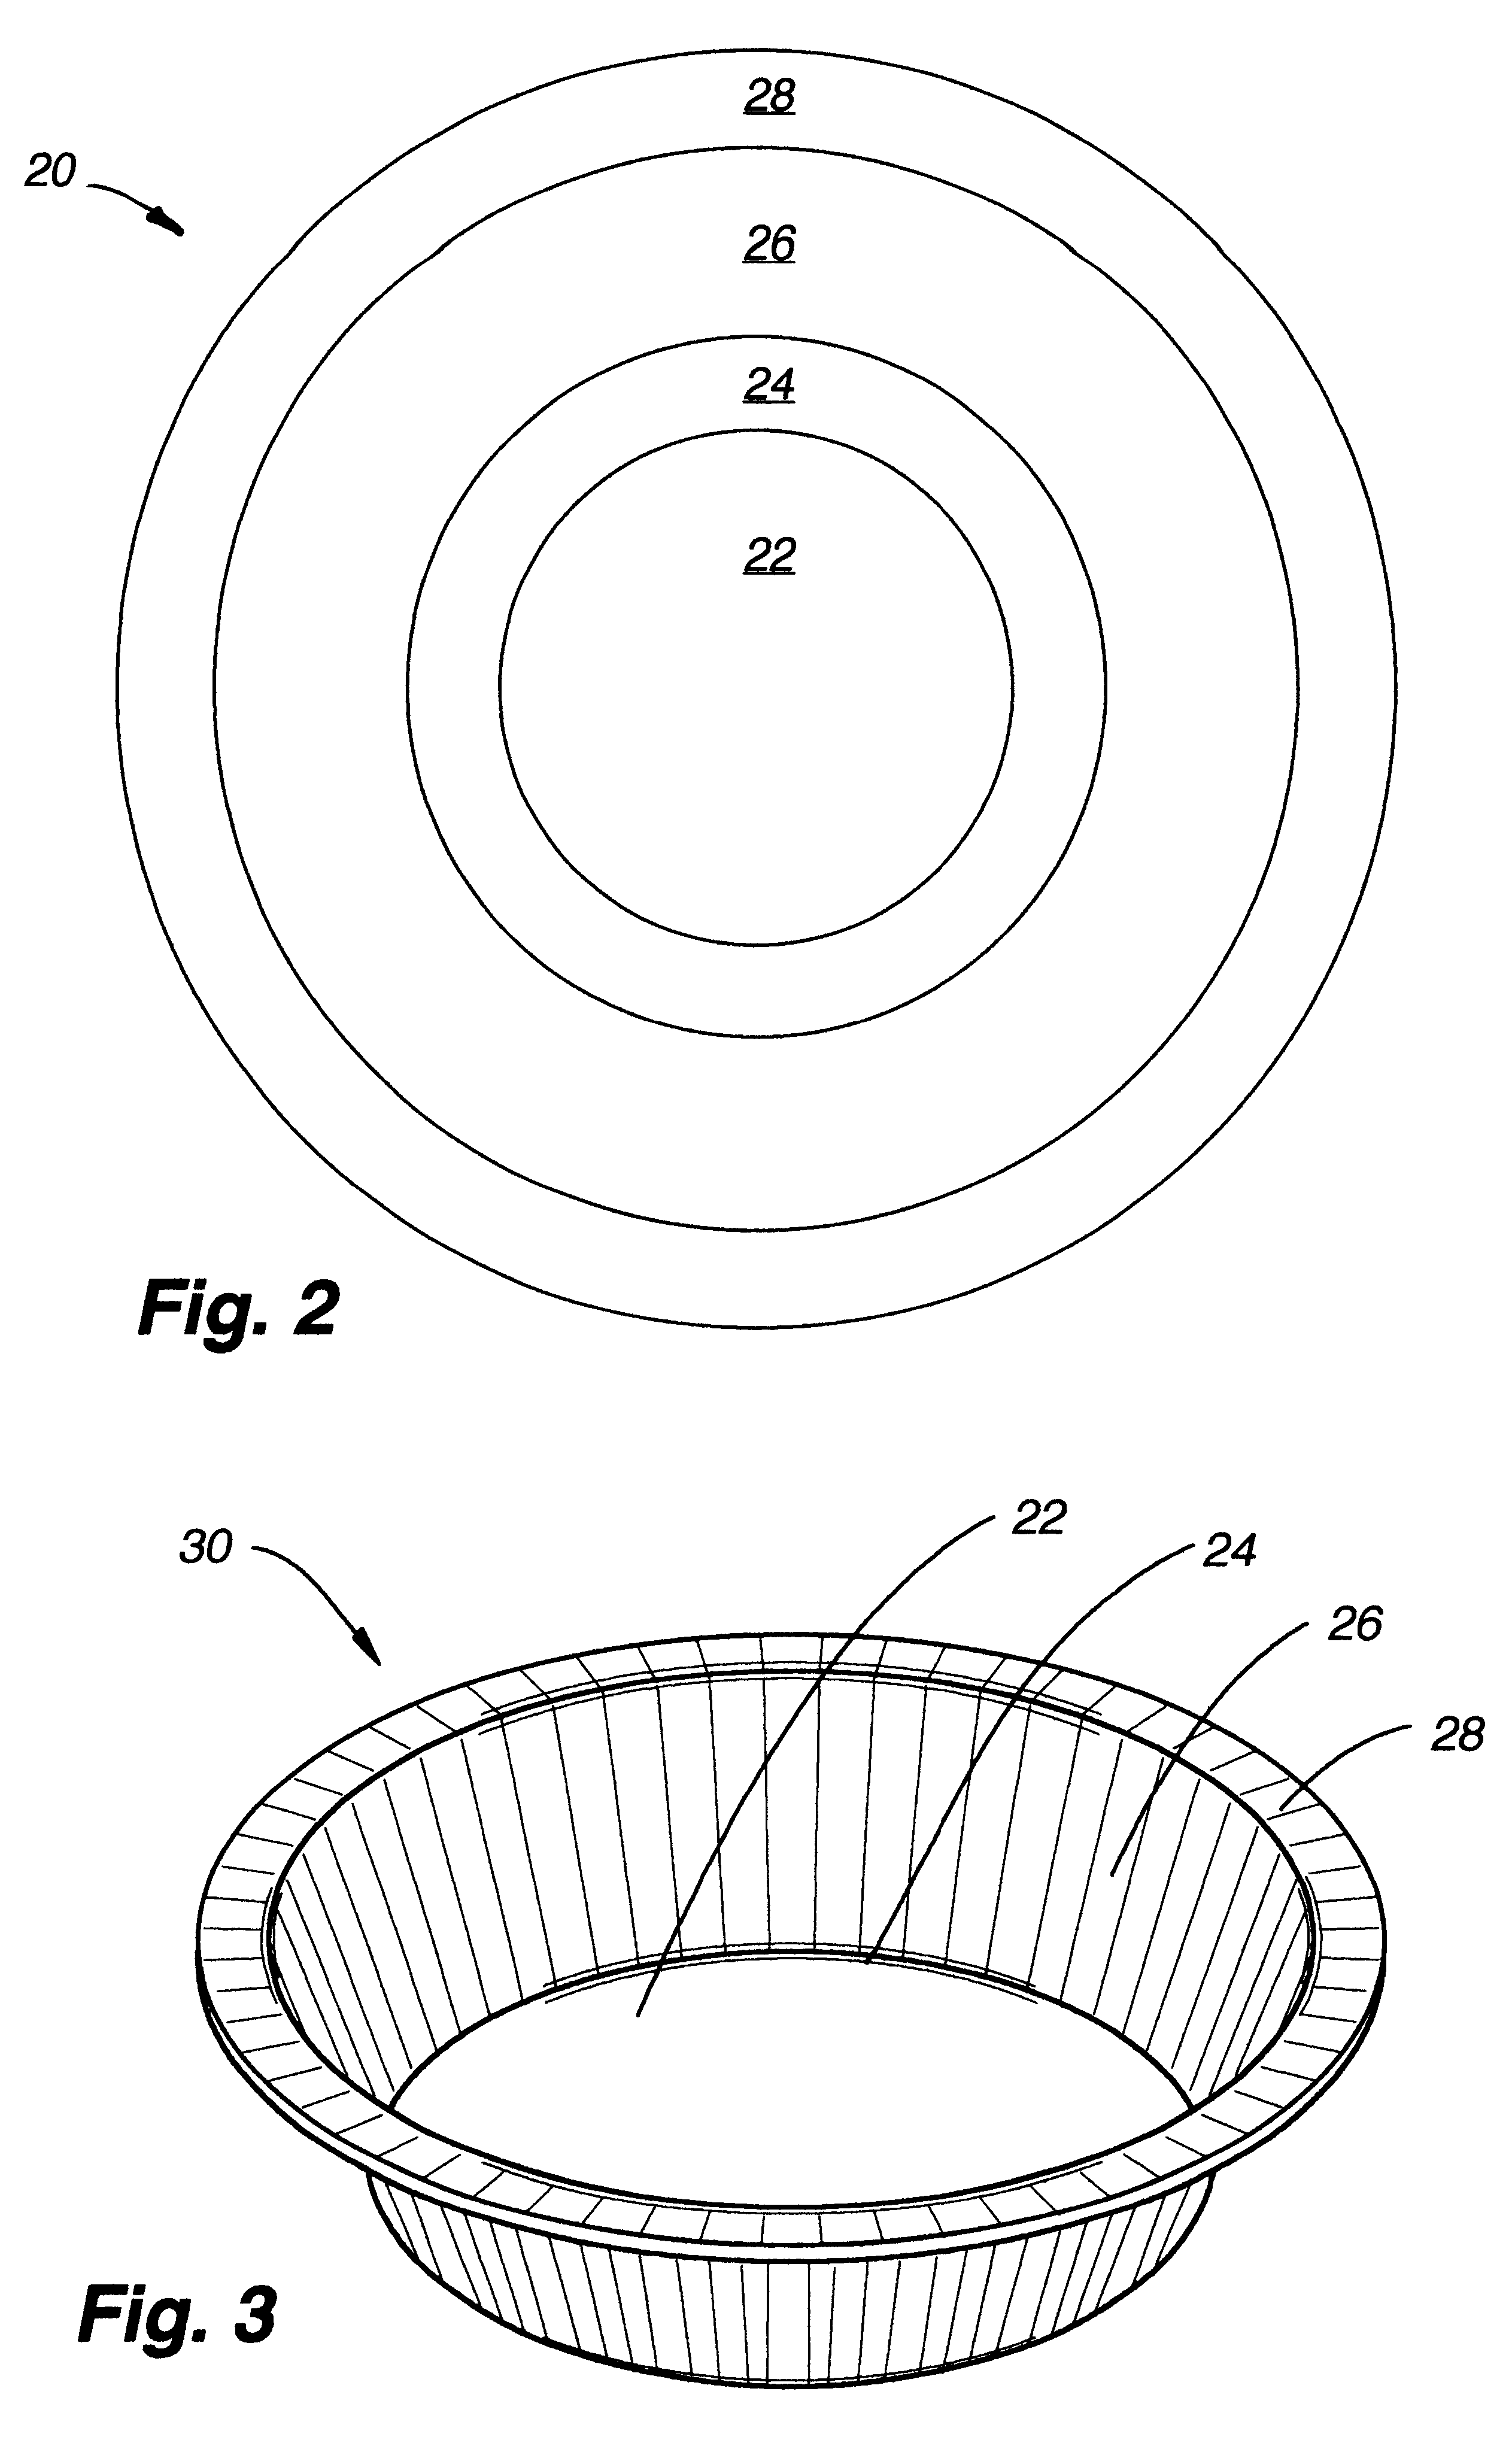 Patterned microwave susceptor element and microwave container incorporating same